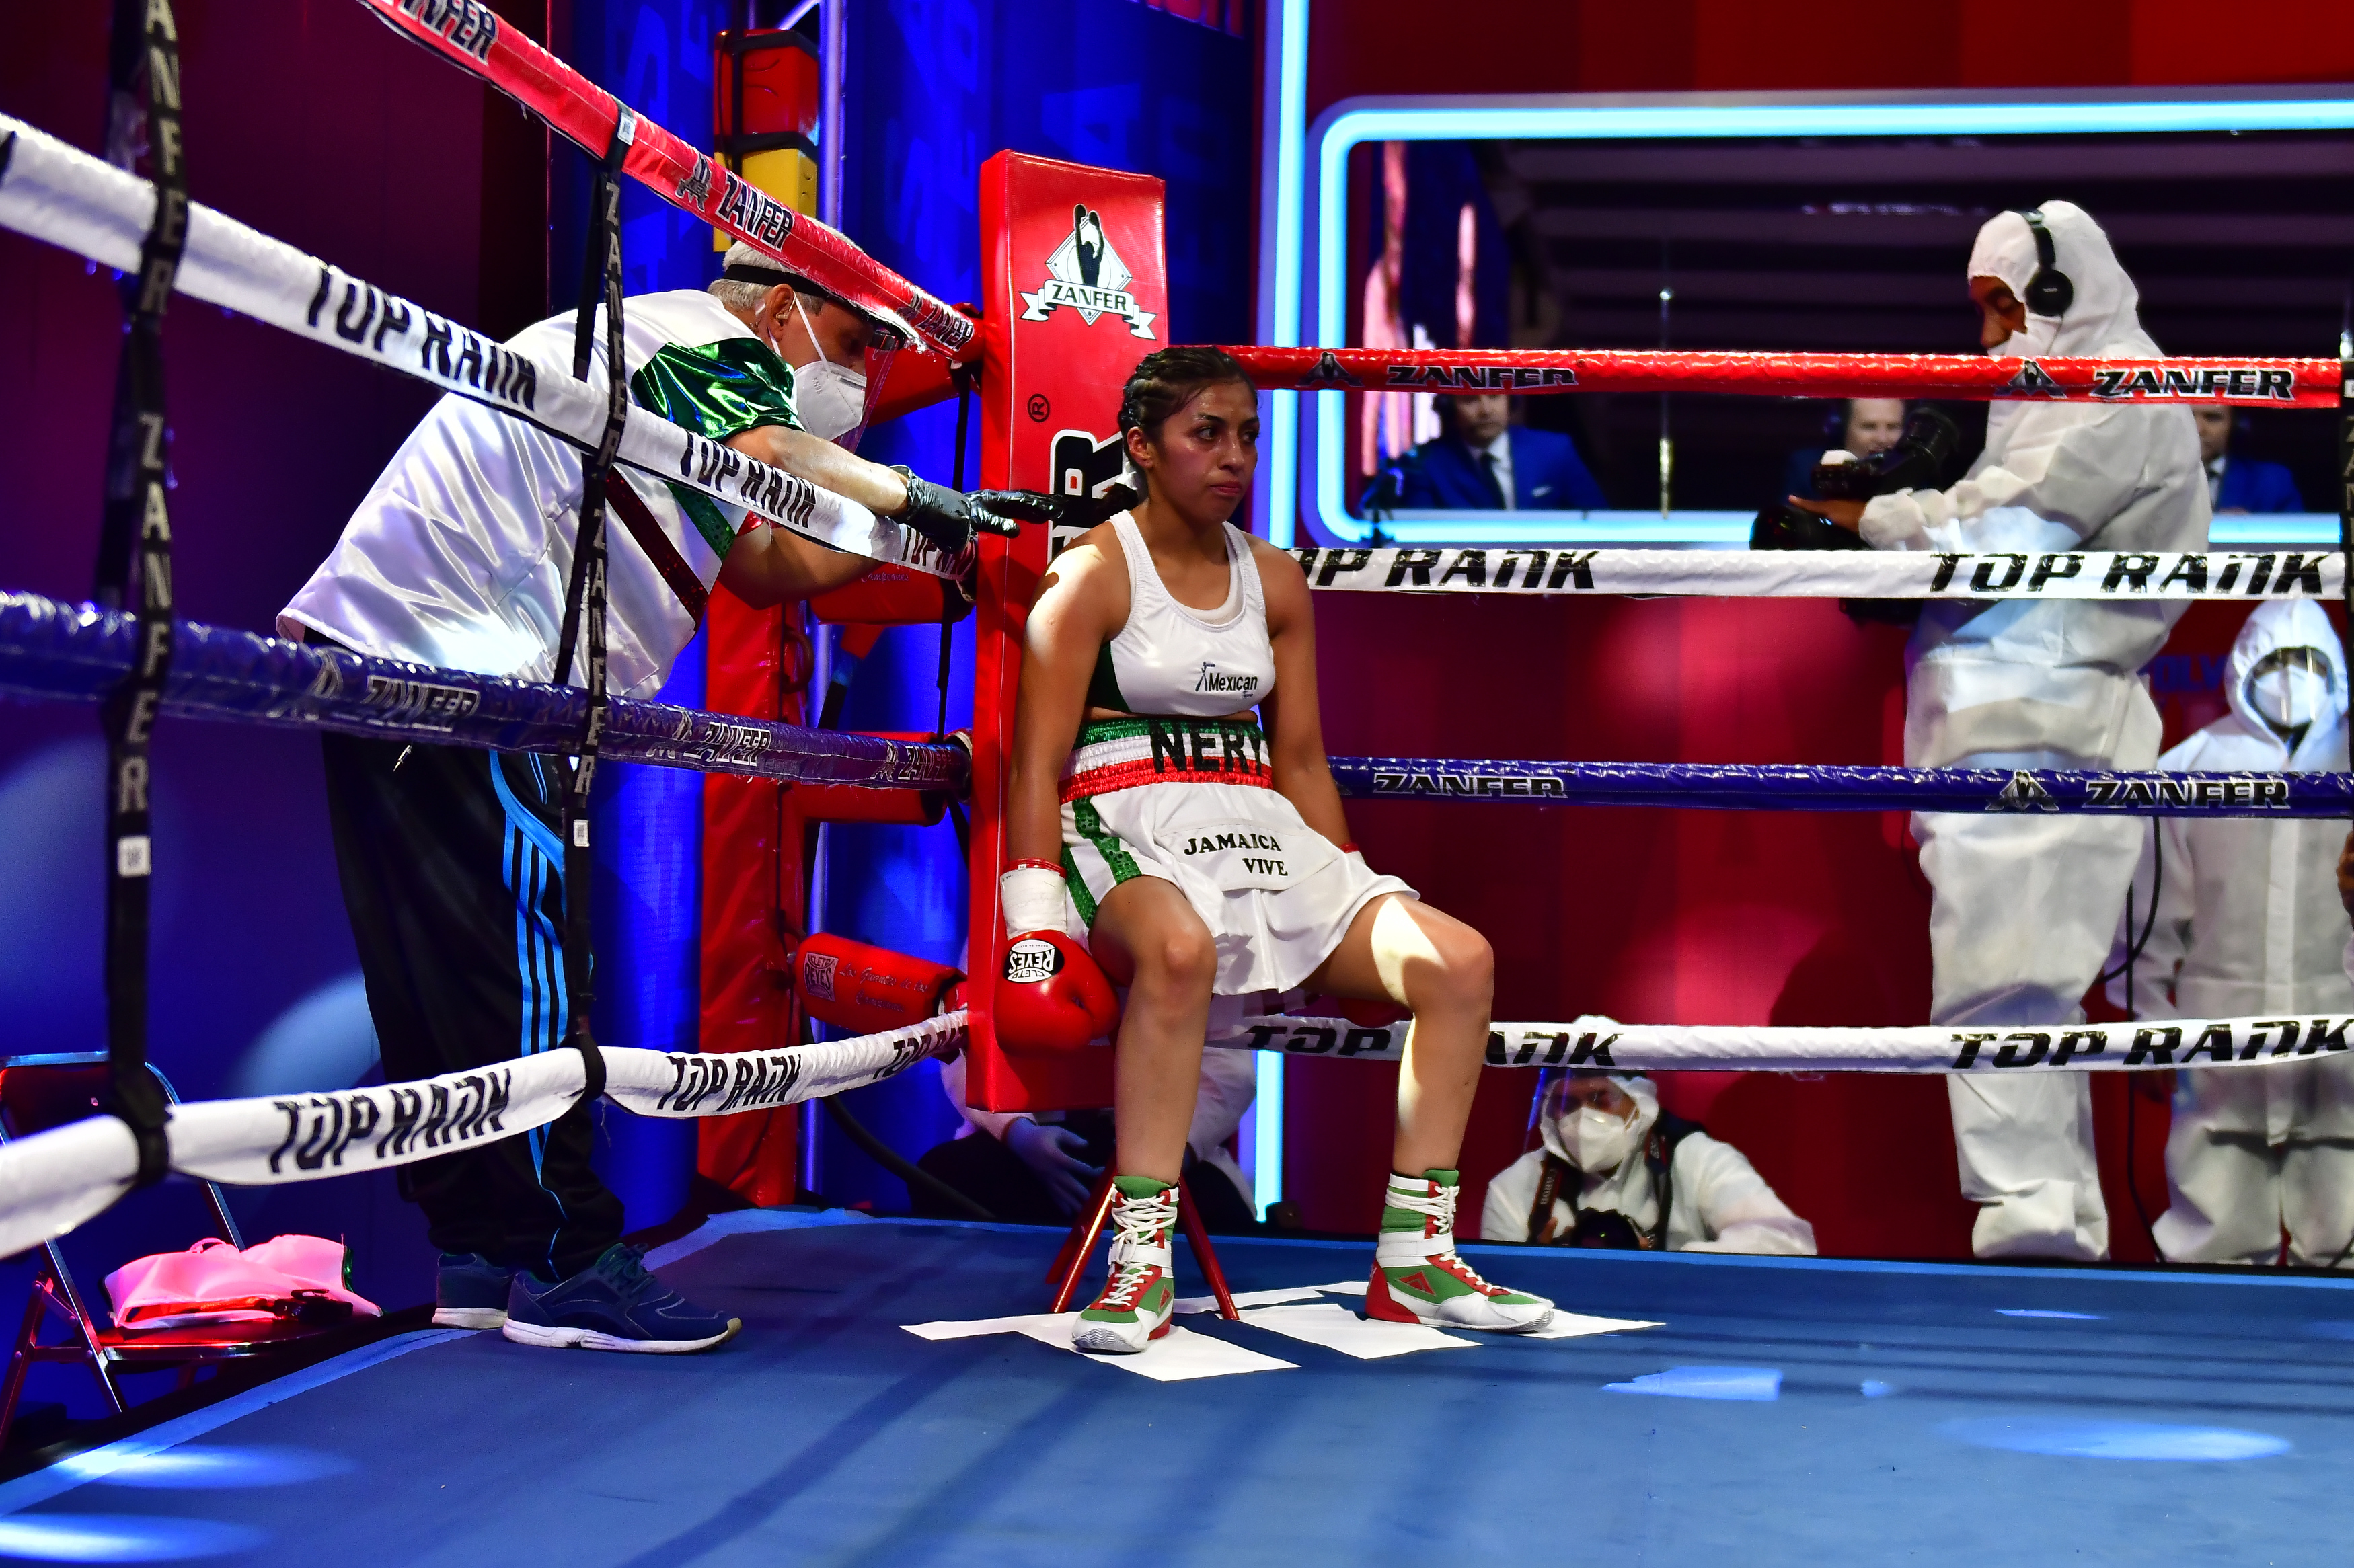 Jessica Nery sits at her corner during a fight against Edith Reyes during an unofficial fight At TV Azteca on June 20, 2020 in Mexico City, Mexico.